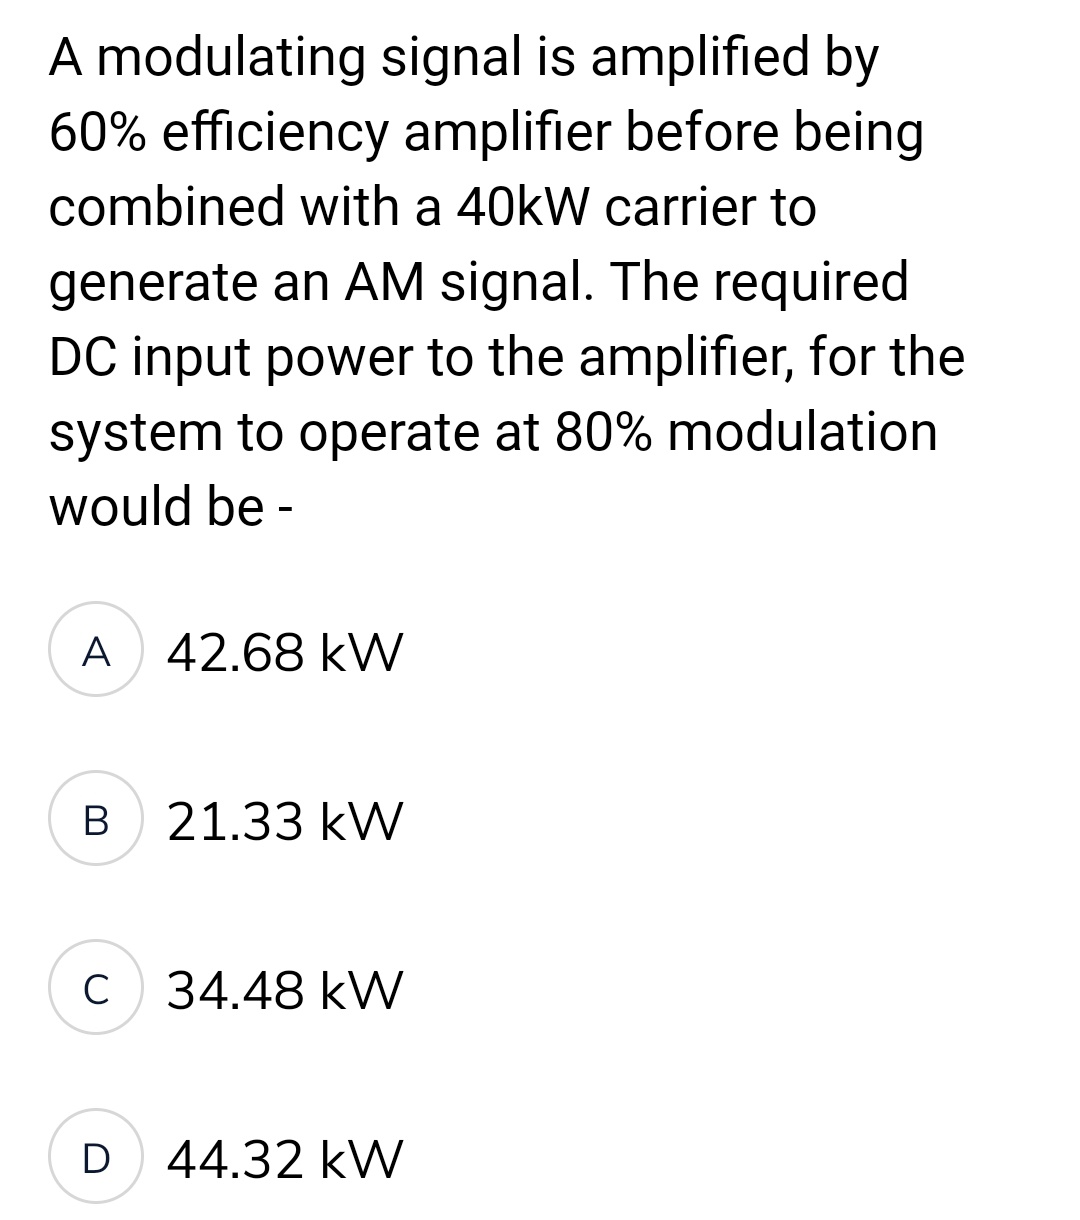 A modulating signal is amplified by
60% efficiency amplifier before being
combined with a 40kW carrier to
generate an AM signal. The required.
DC input power to the amplifier, for the
system to operate at 80% modulation
would be -
A 42.68 kW
B
21.33 kW
C 34.48 kW
D 44.32 kW